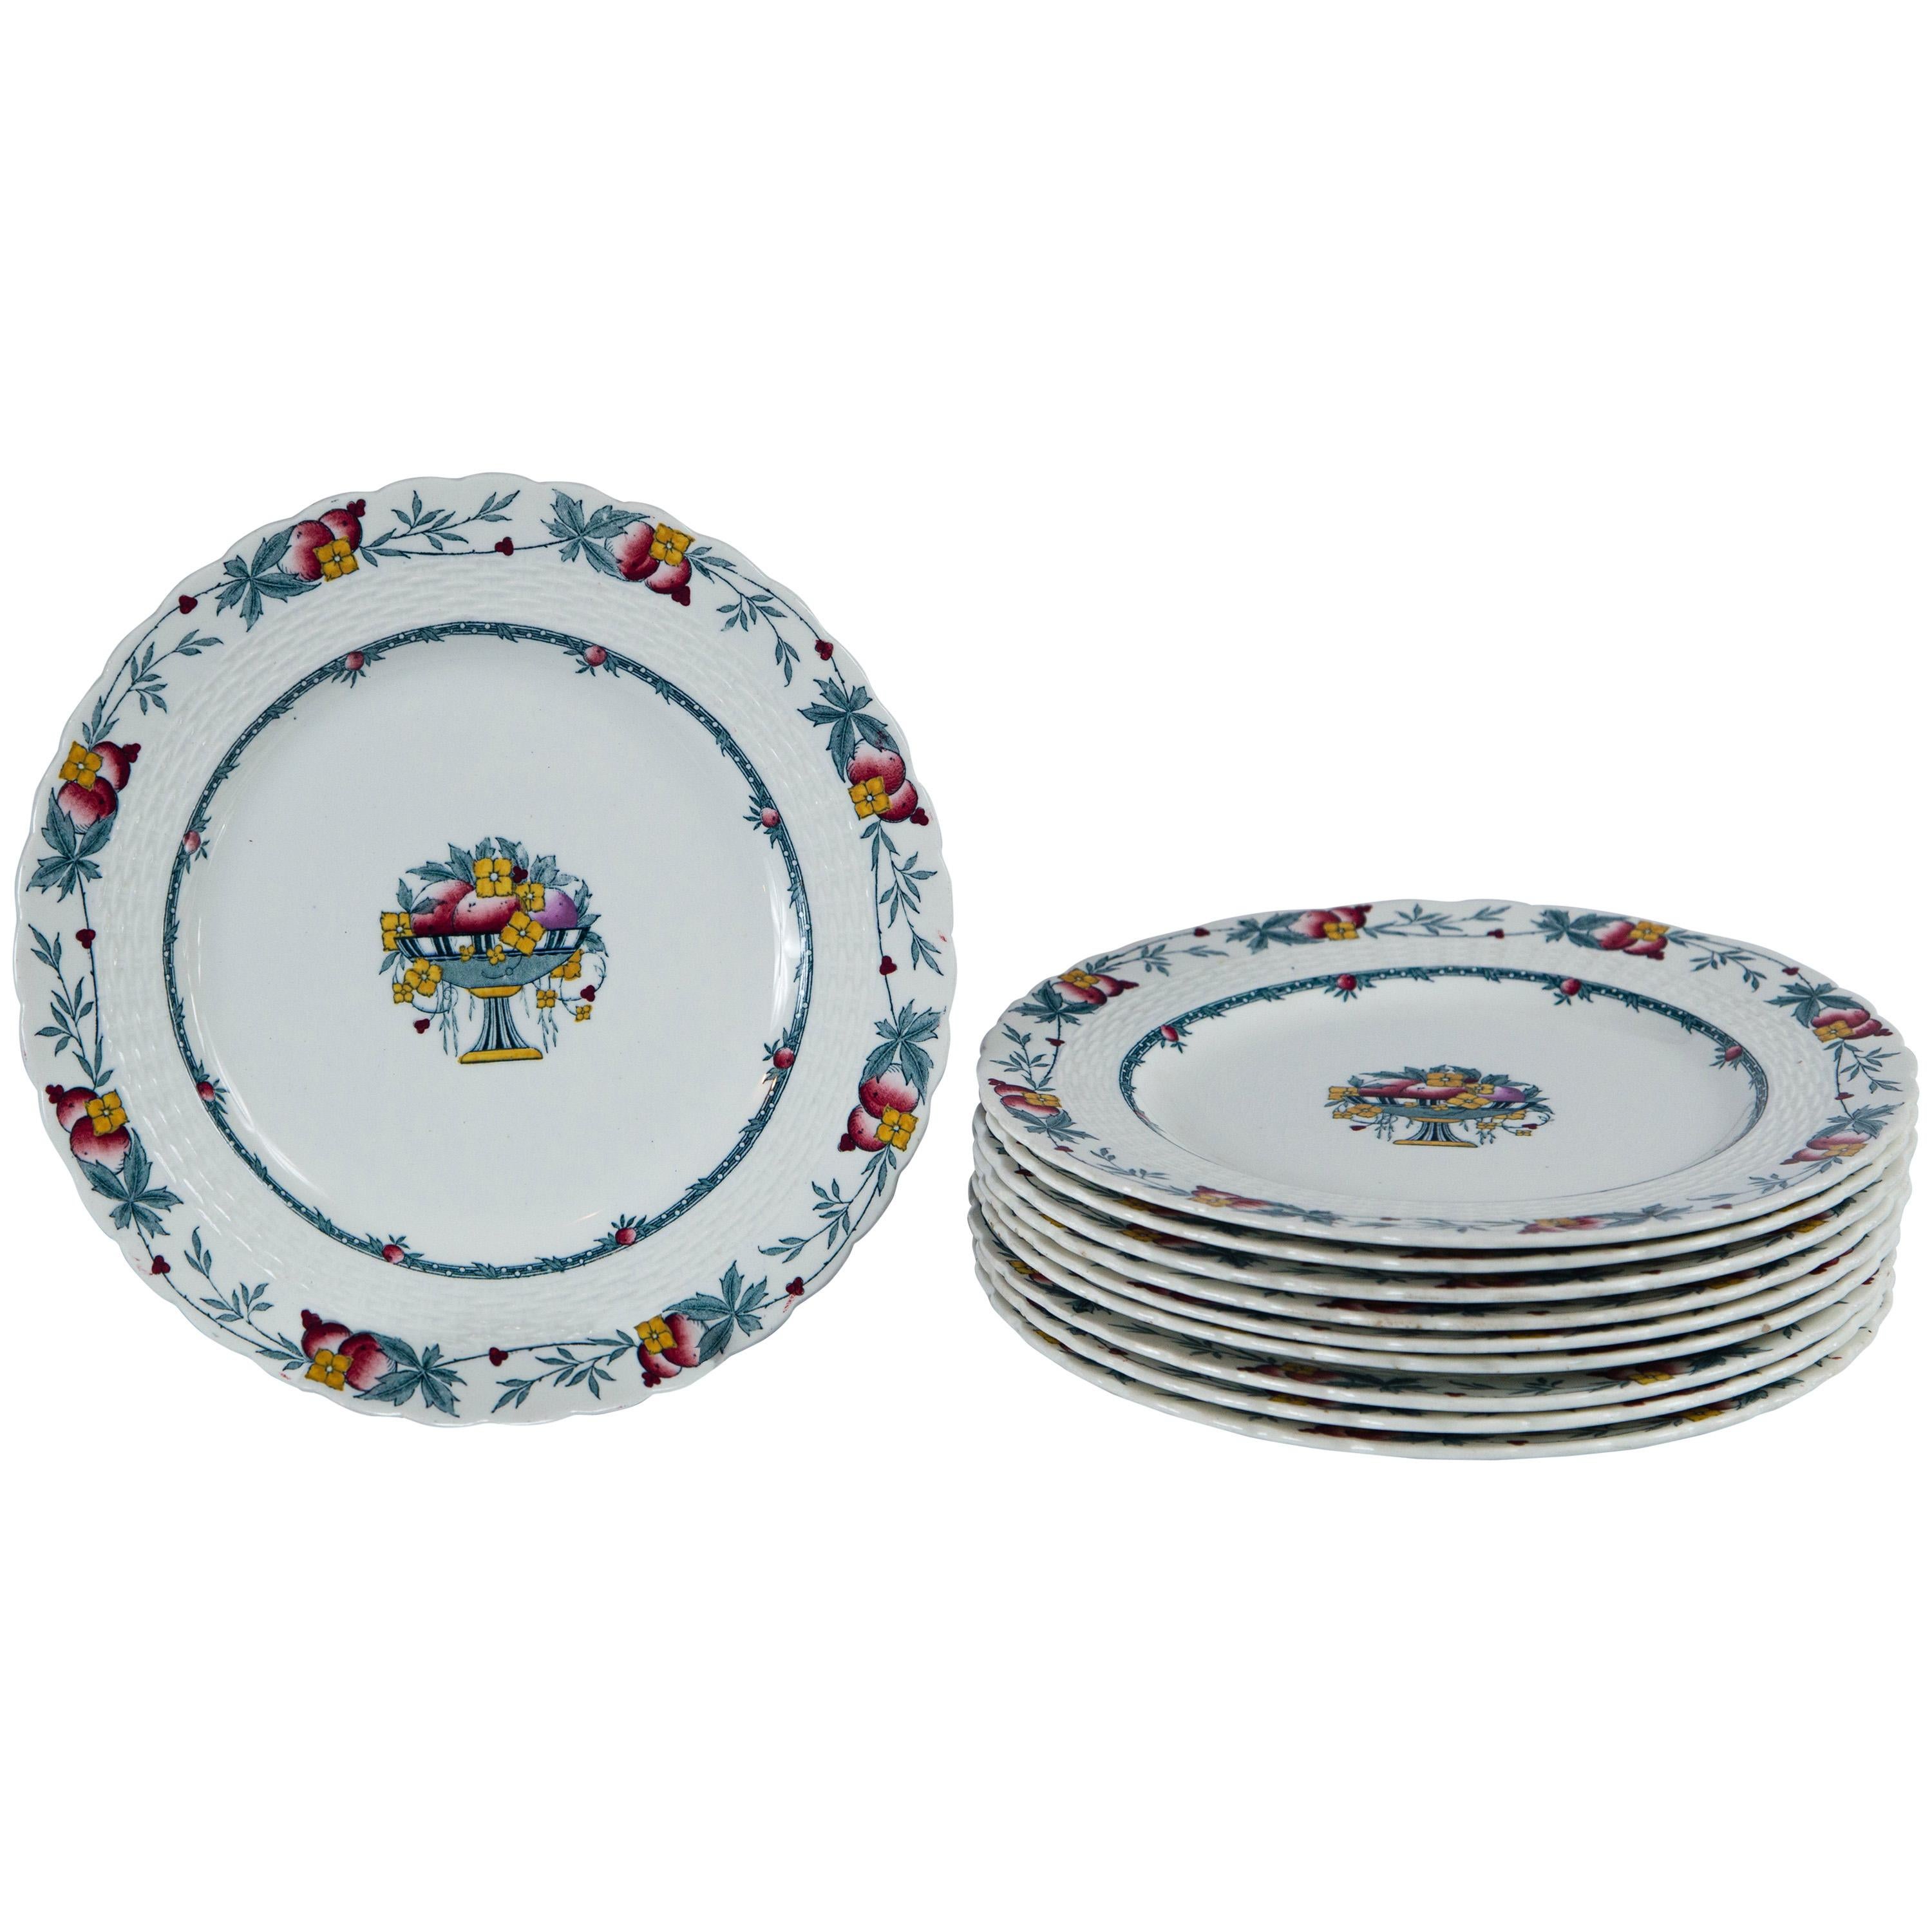 Set of 10 Minton's Stanhope Plates, England, circa 1900 For Sale